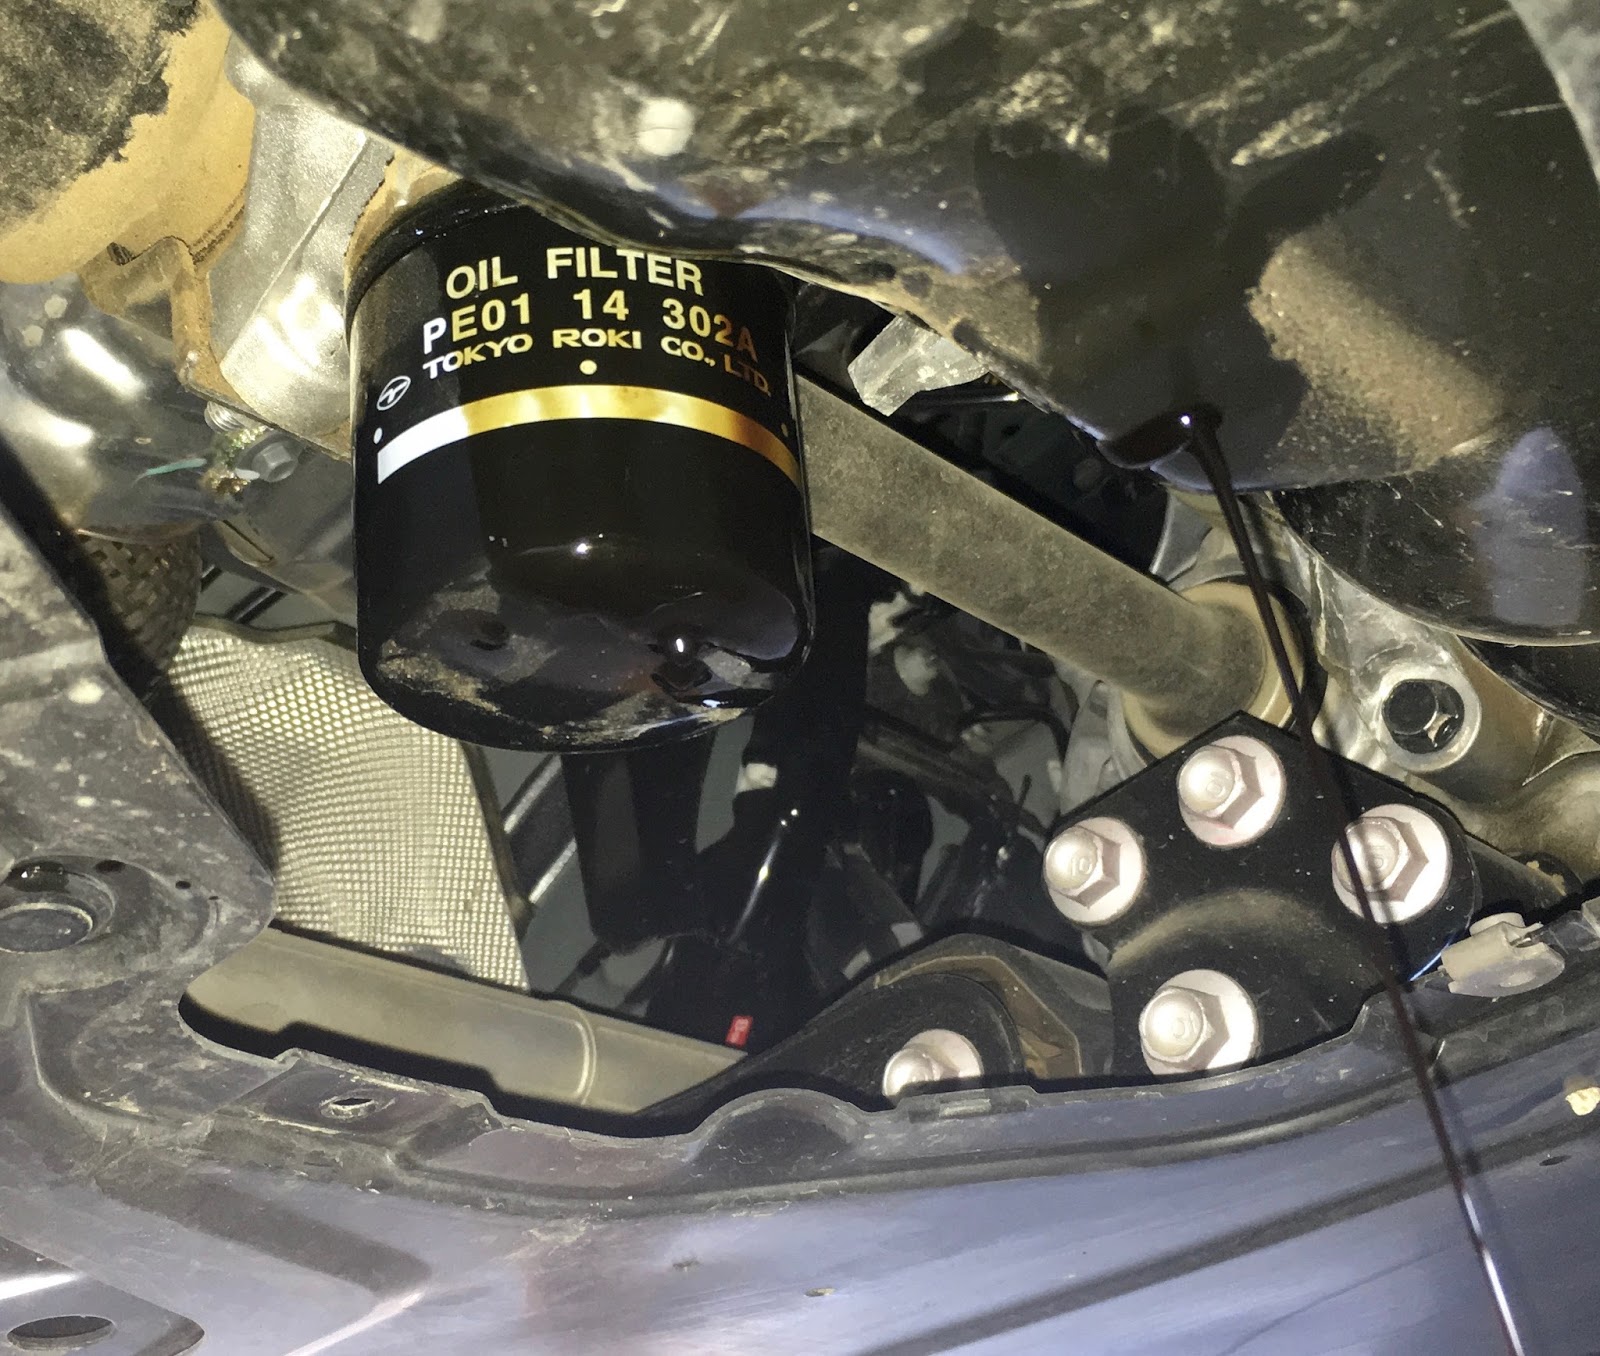 Mx5 gearbox oil change guide